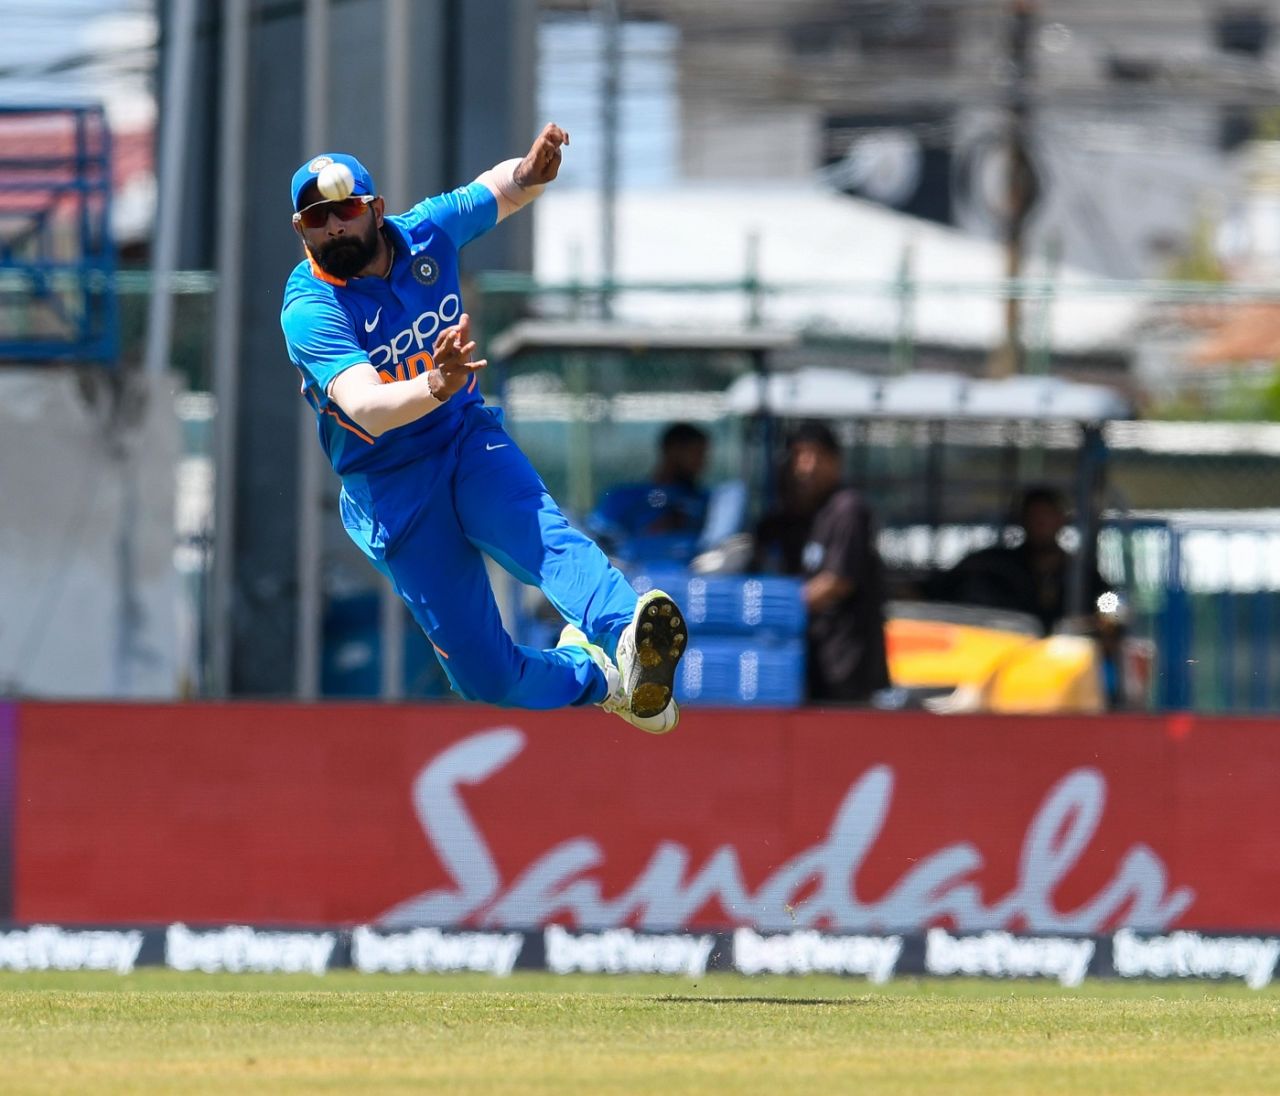 Mohammed Shami is airborne as he rifles in a throw, West Indies v India, 3rd ODI, Port of Spain, August 14, 2019